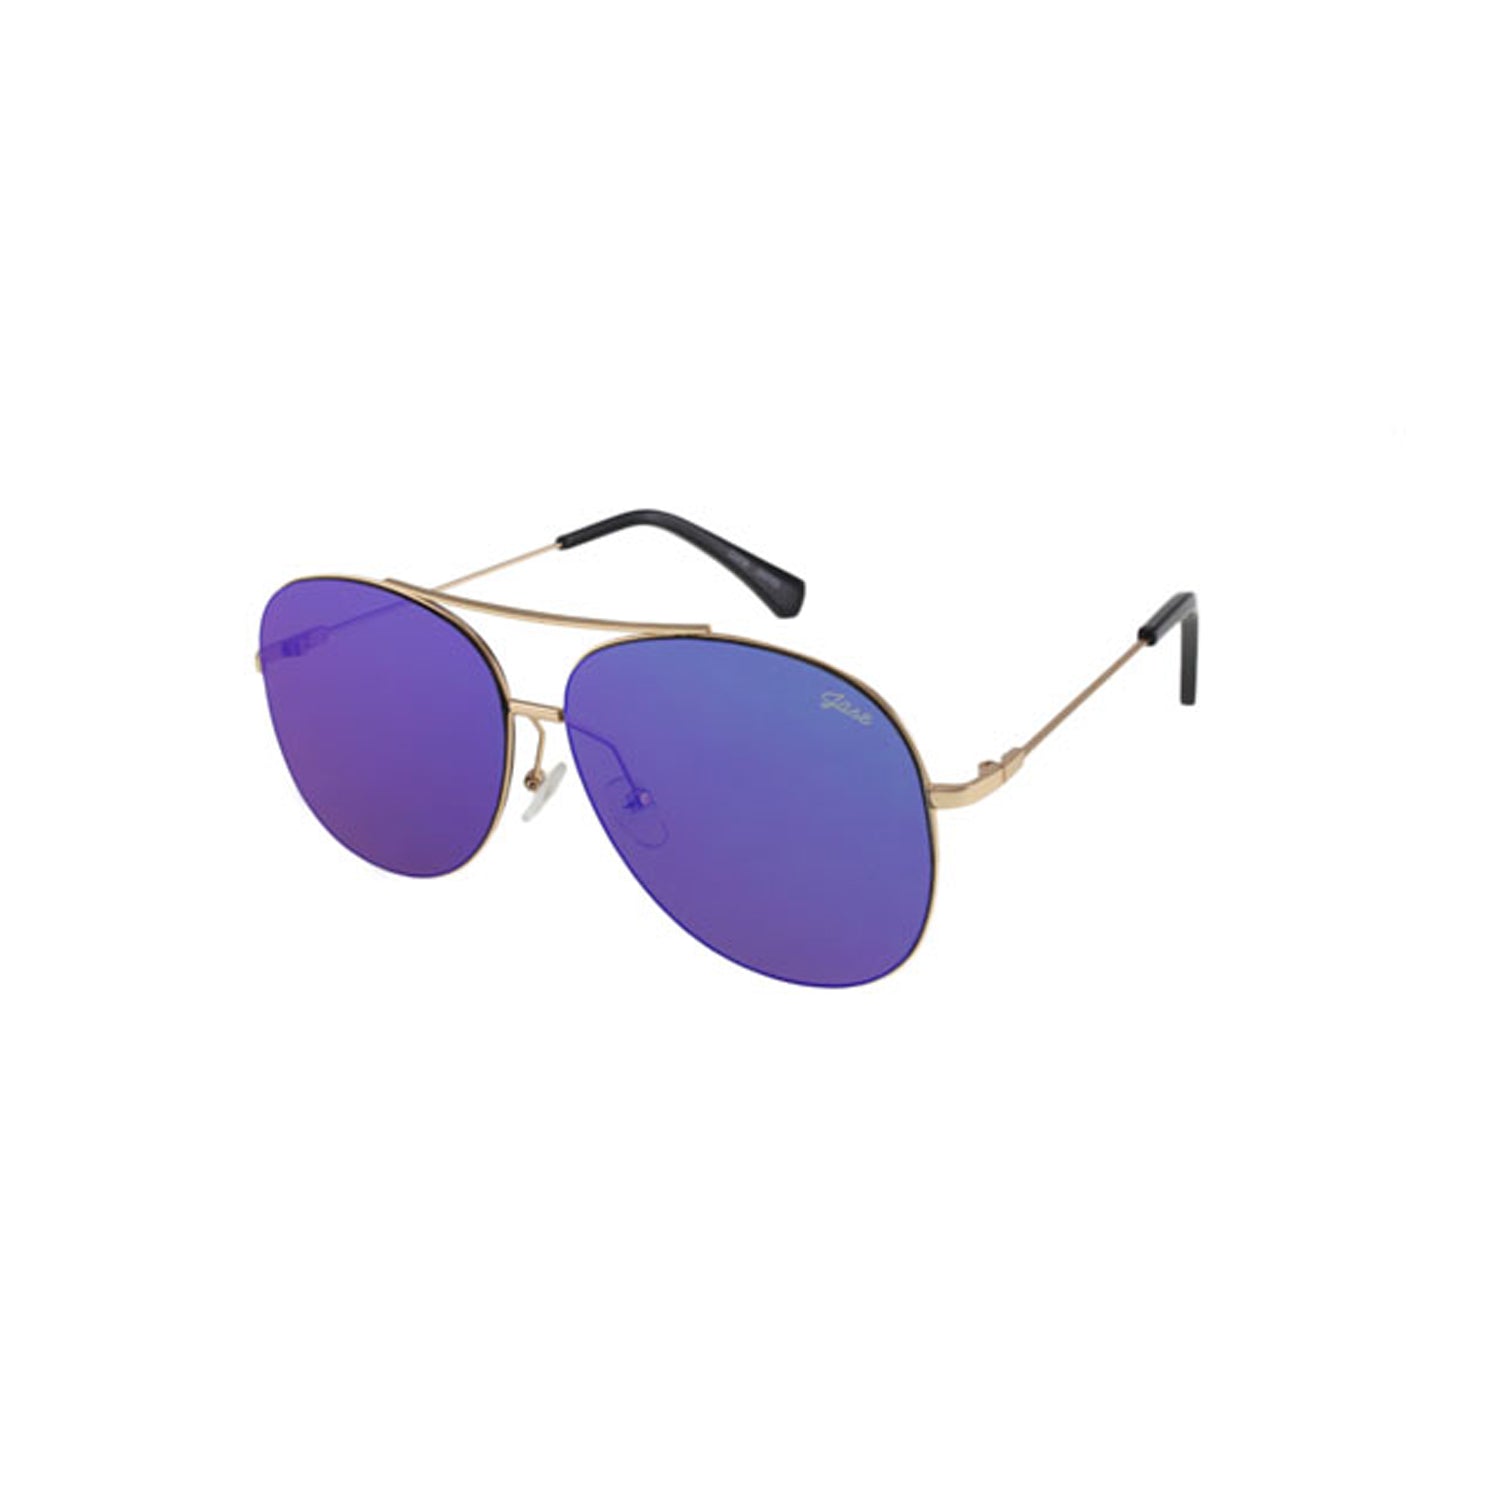 Jase New York Justice Sunglasses in Gold - Shop Luxurious57